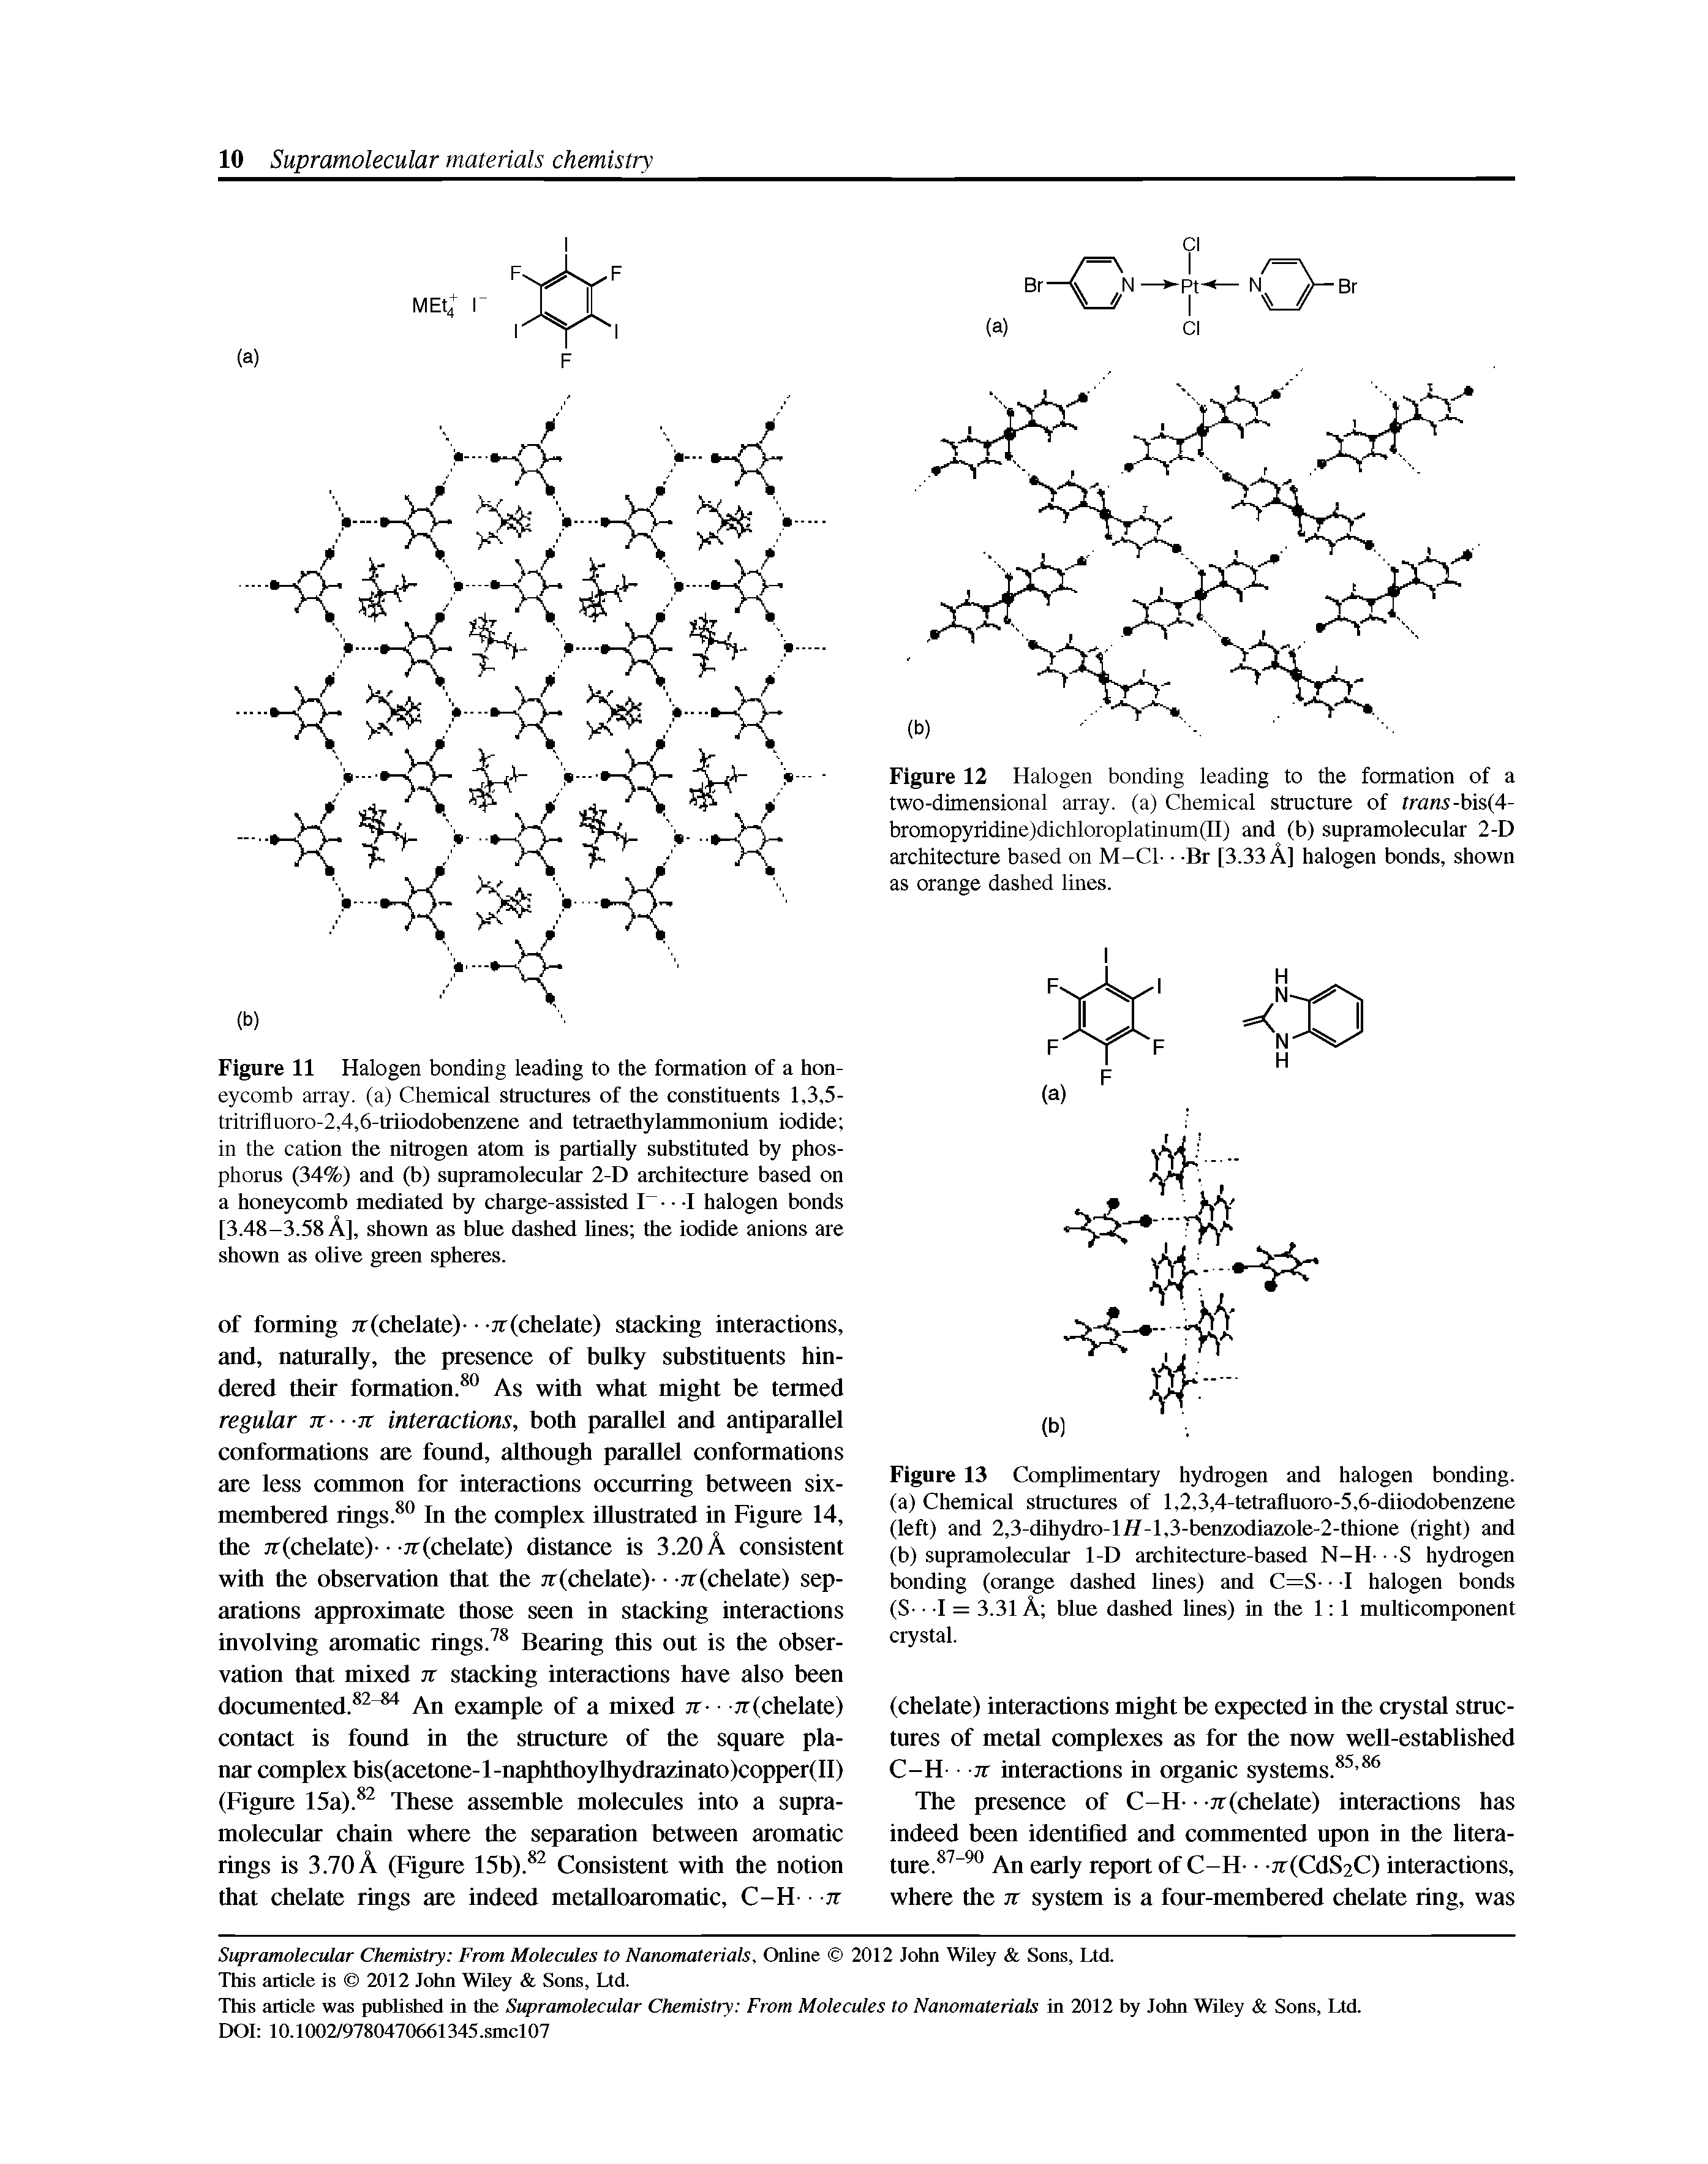 Figure 11 Halogen bonding leading to the formation of a honeycomb array, (a) Chemical structures of the constituents 1,3,5-tritrifluoro-2,4,6-triiodobenzene and tetraethylammonium iodide in the cation the nitrogen atom is partiaUy substituted by phosphorus (34%) and (b) supramolecular 2-D architecture based on a honeycomb mediated by charge-assisted I - -I halogen bonds [3.48-3.58 A], shown as blue dashed lines the iodide anions are shown as olive green spheres.